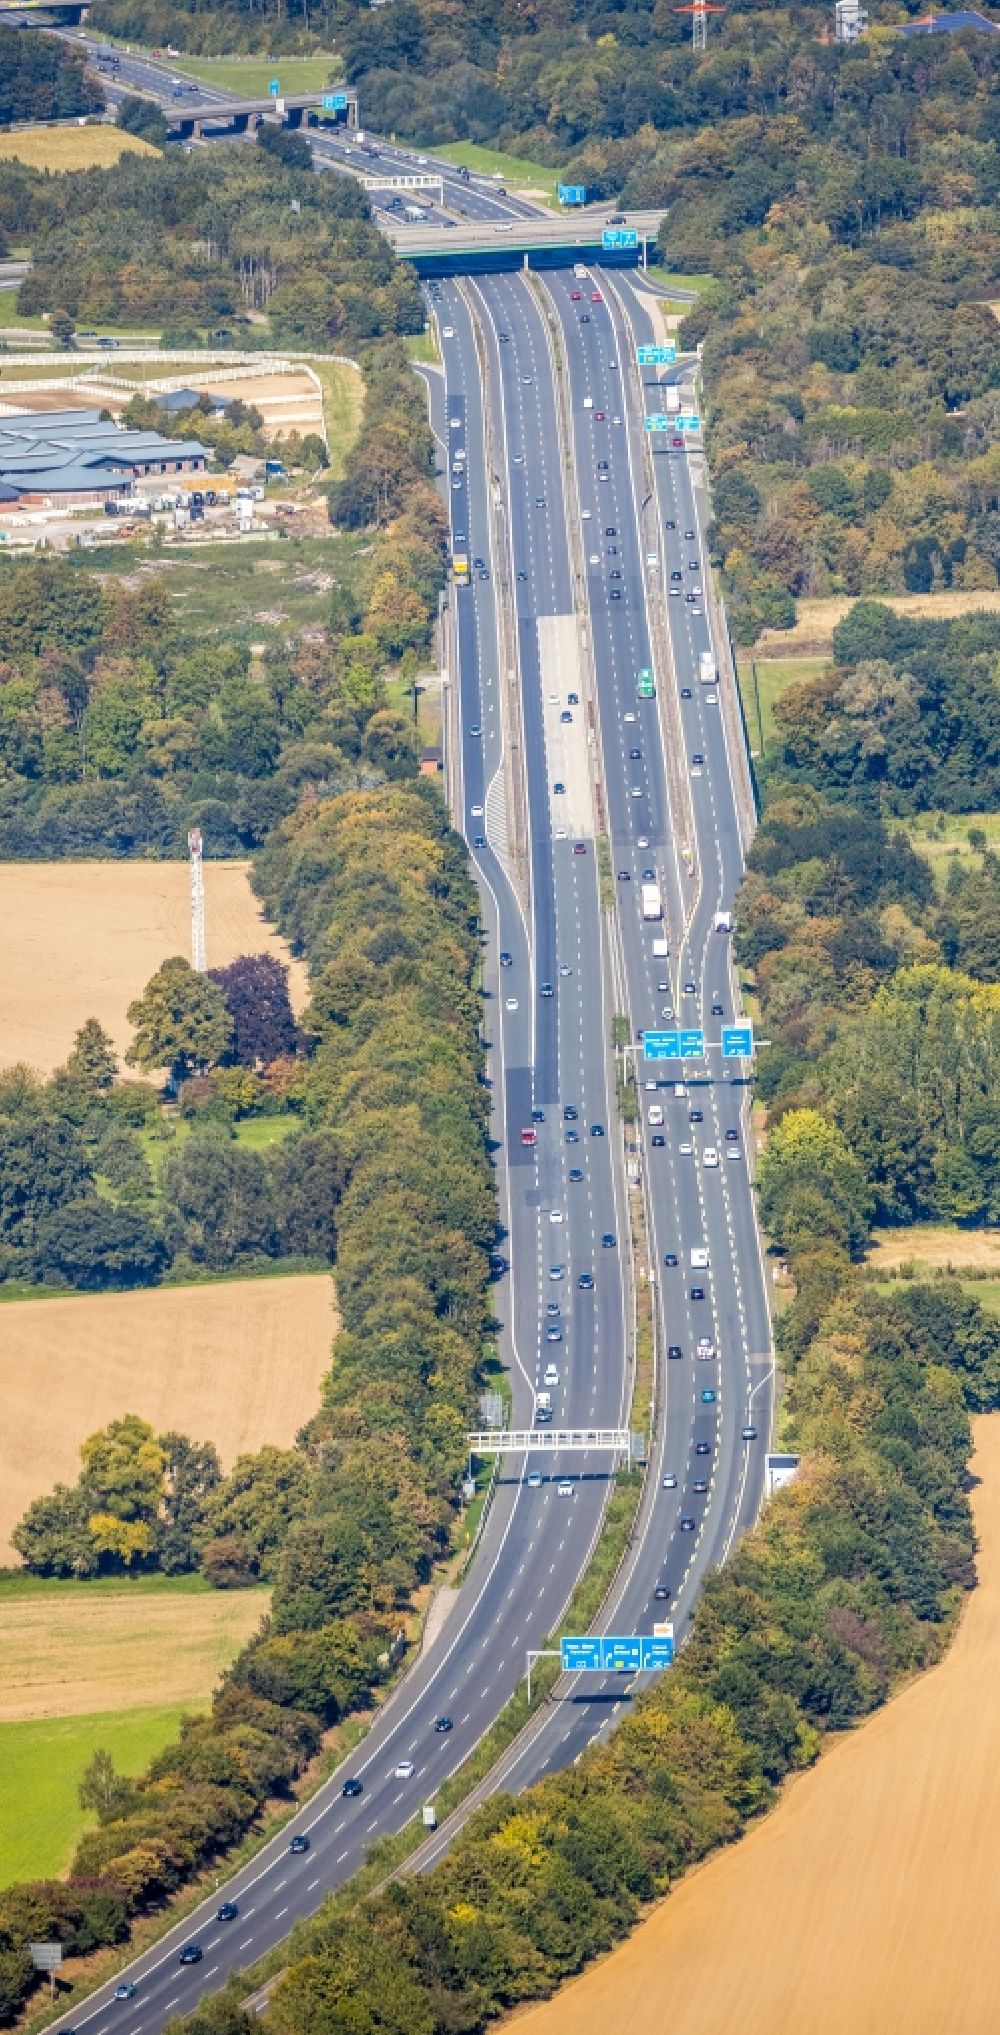 Unna from above - Route and lanes in the course of the exit and access of the motorway junction of the BAB A1 and BAB A44 in Unna in the state North Rhine-Westphalia, Germany